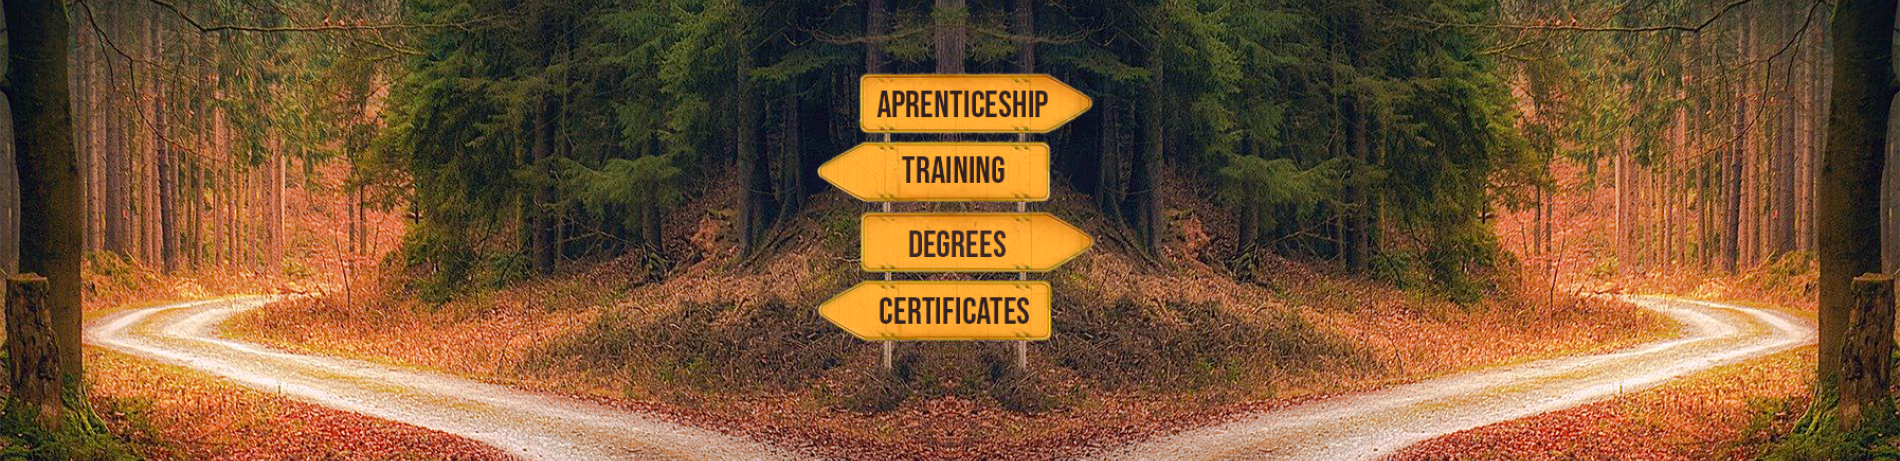 types of degrees certificates